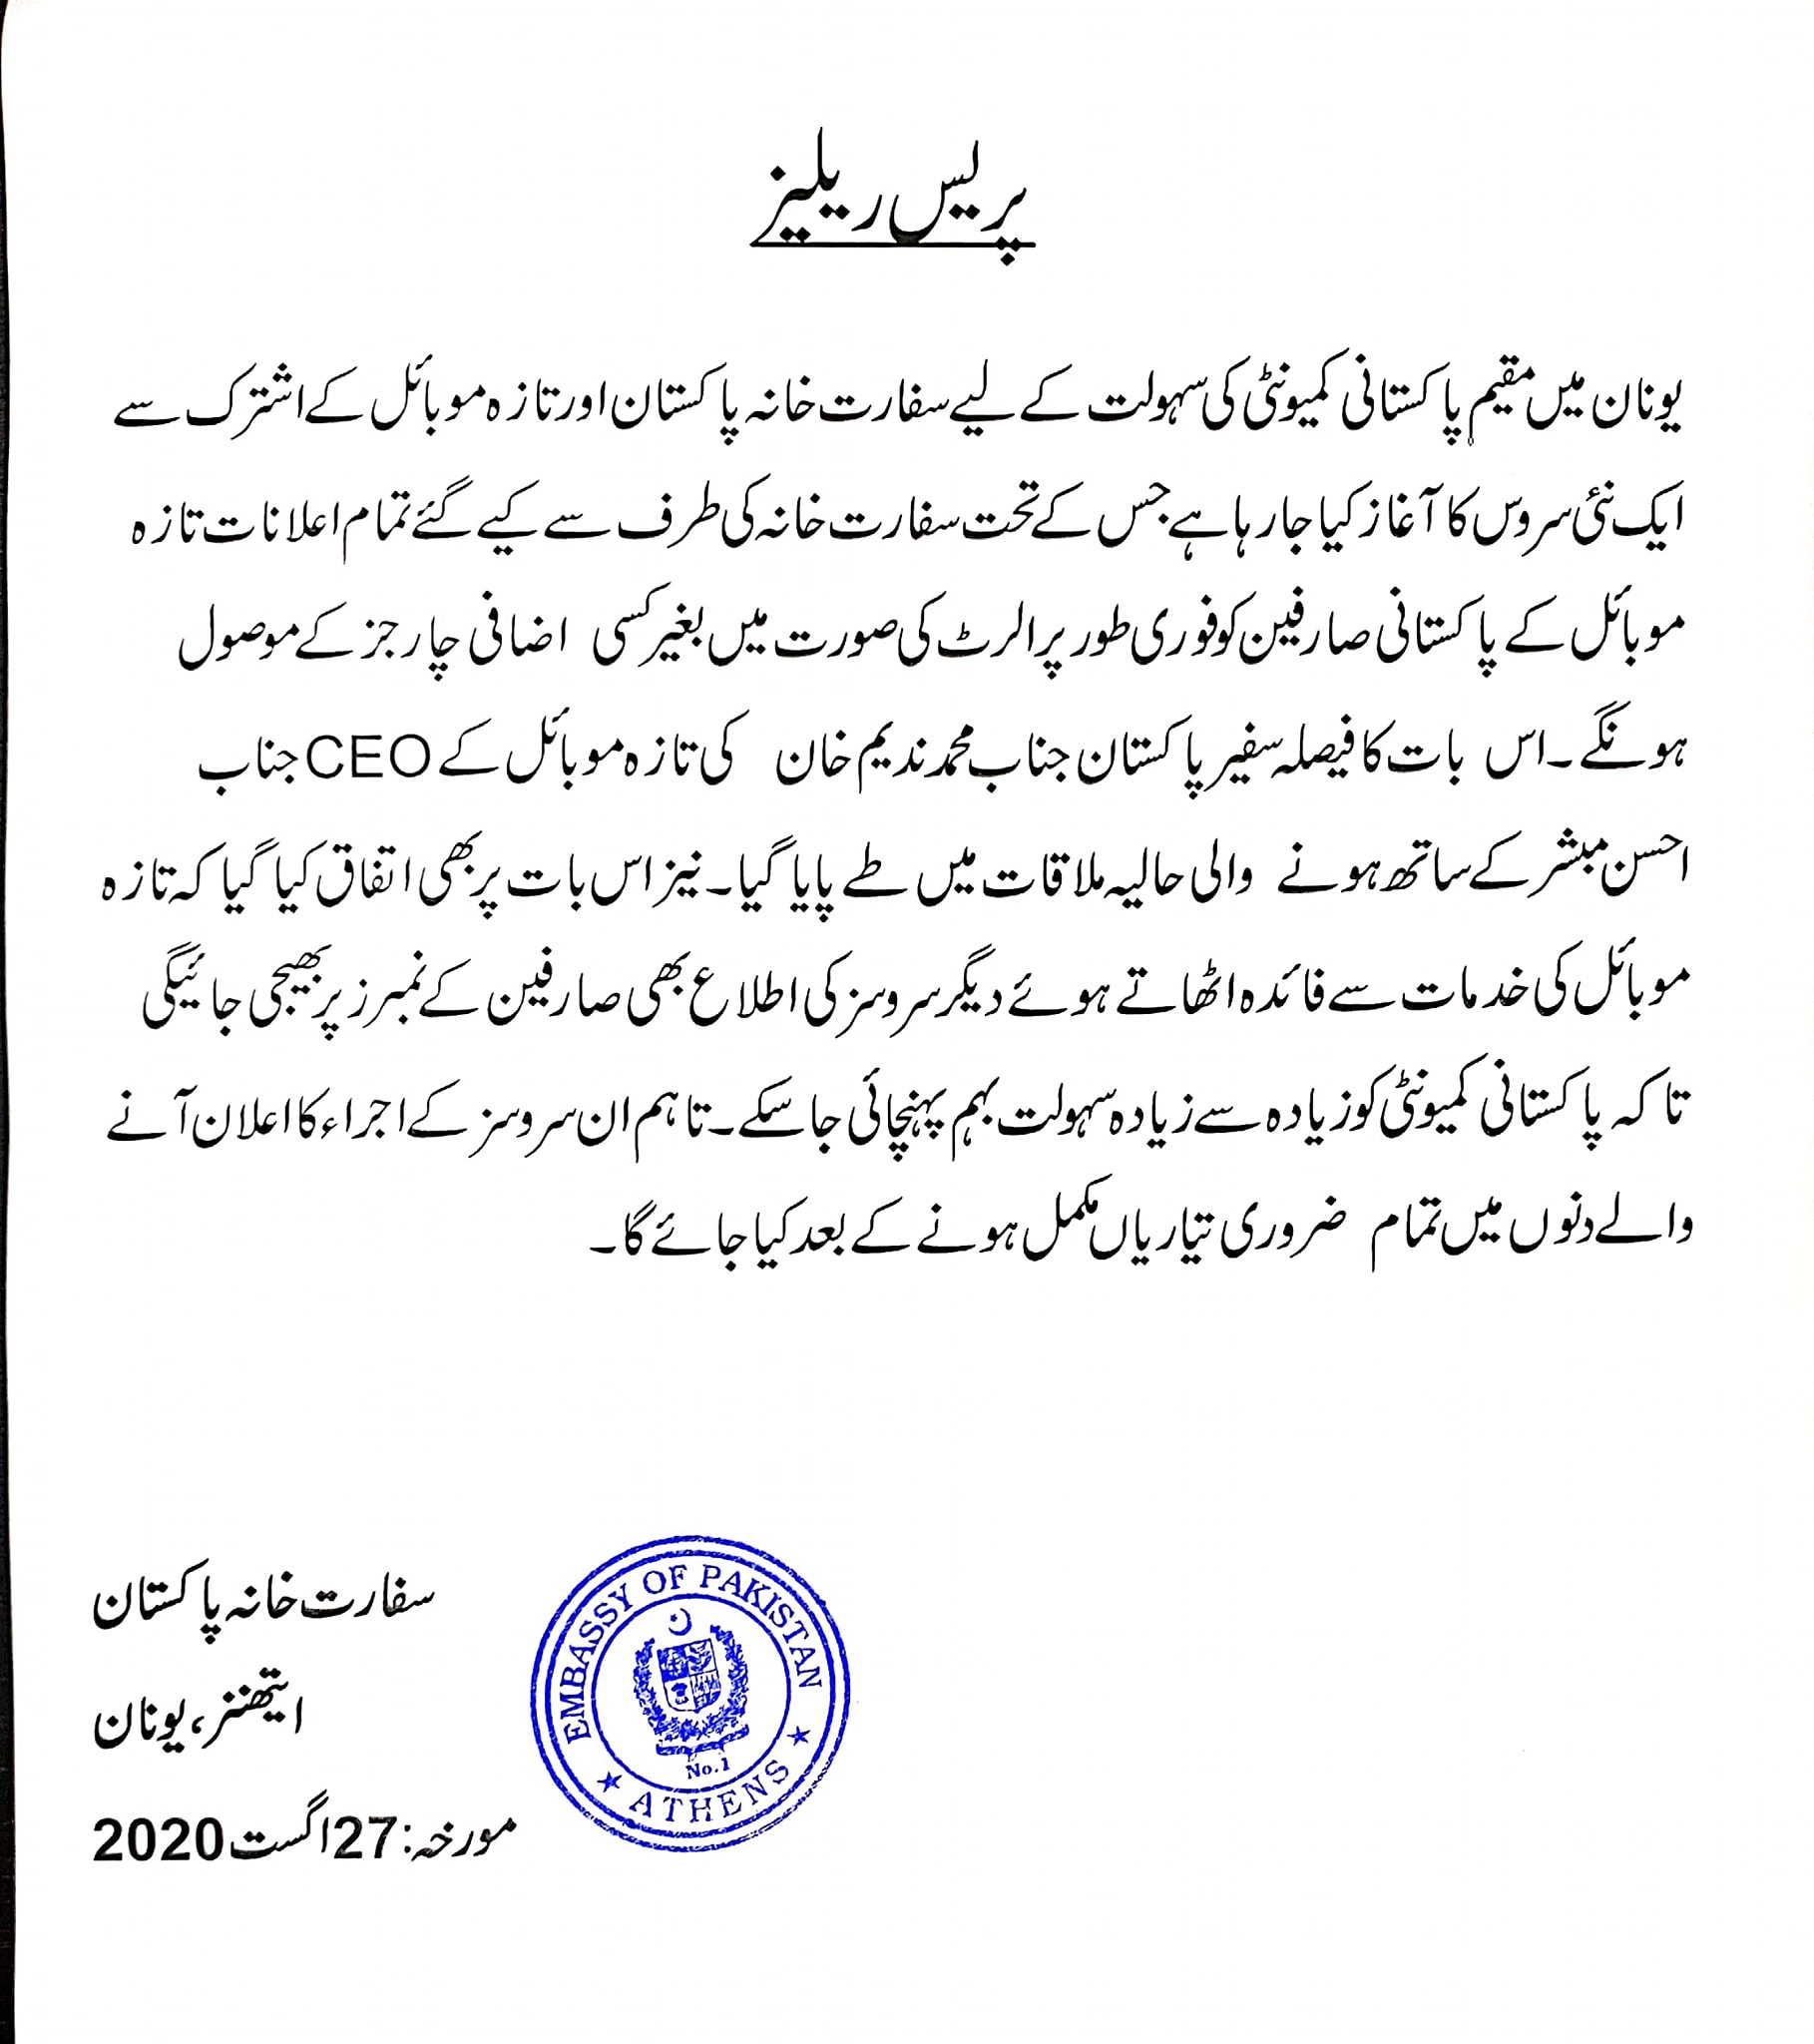 Press Release: Collaboration with Taza Mobile for Information Service